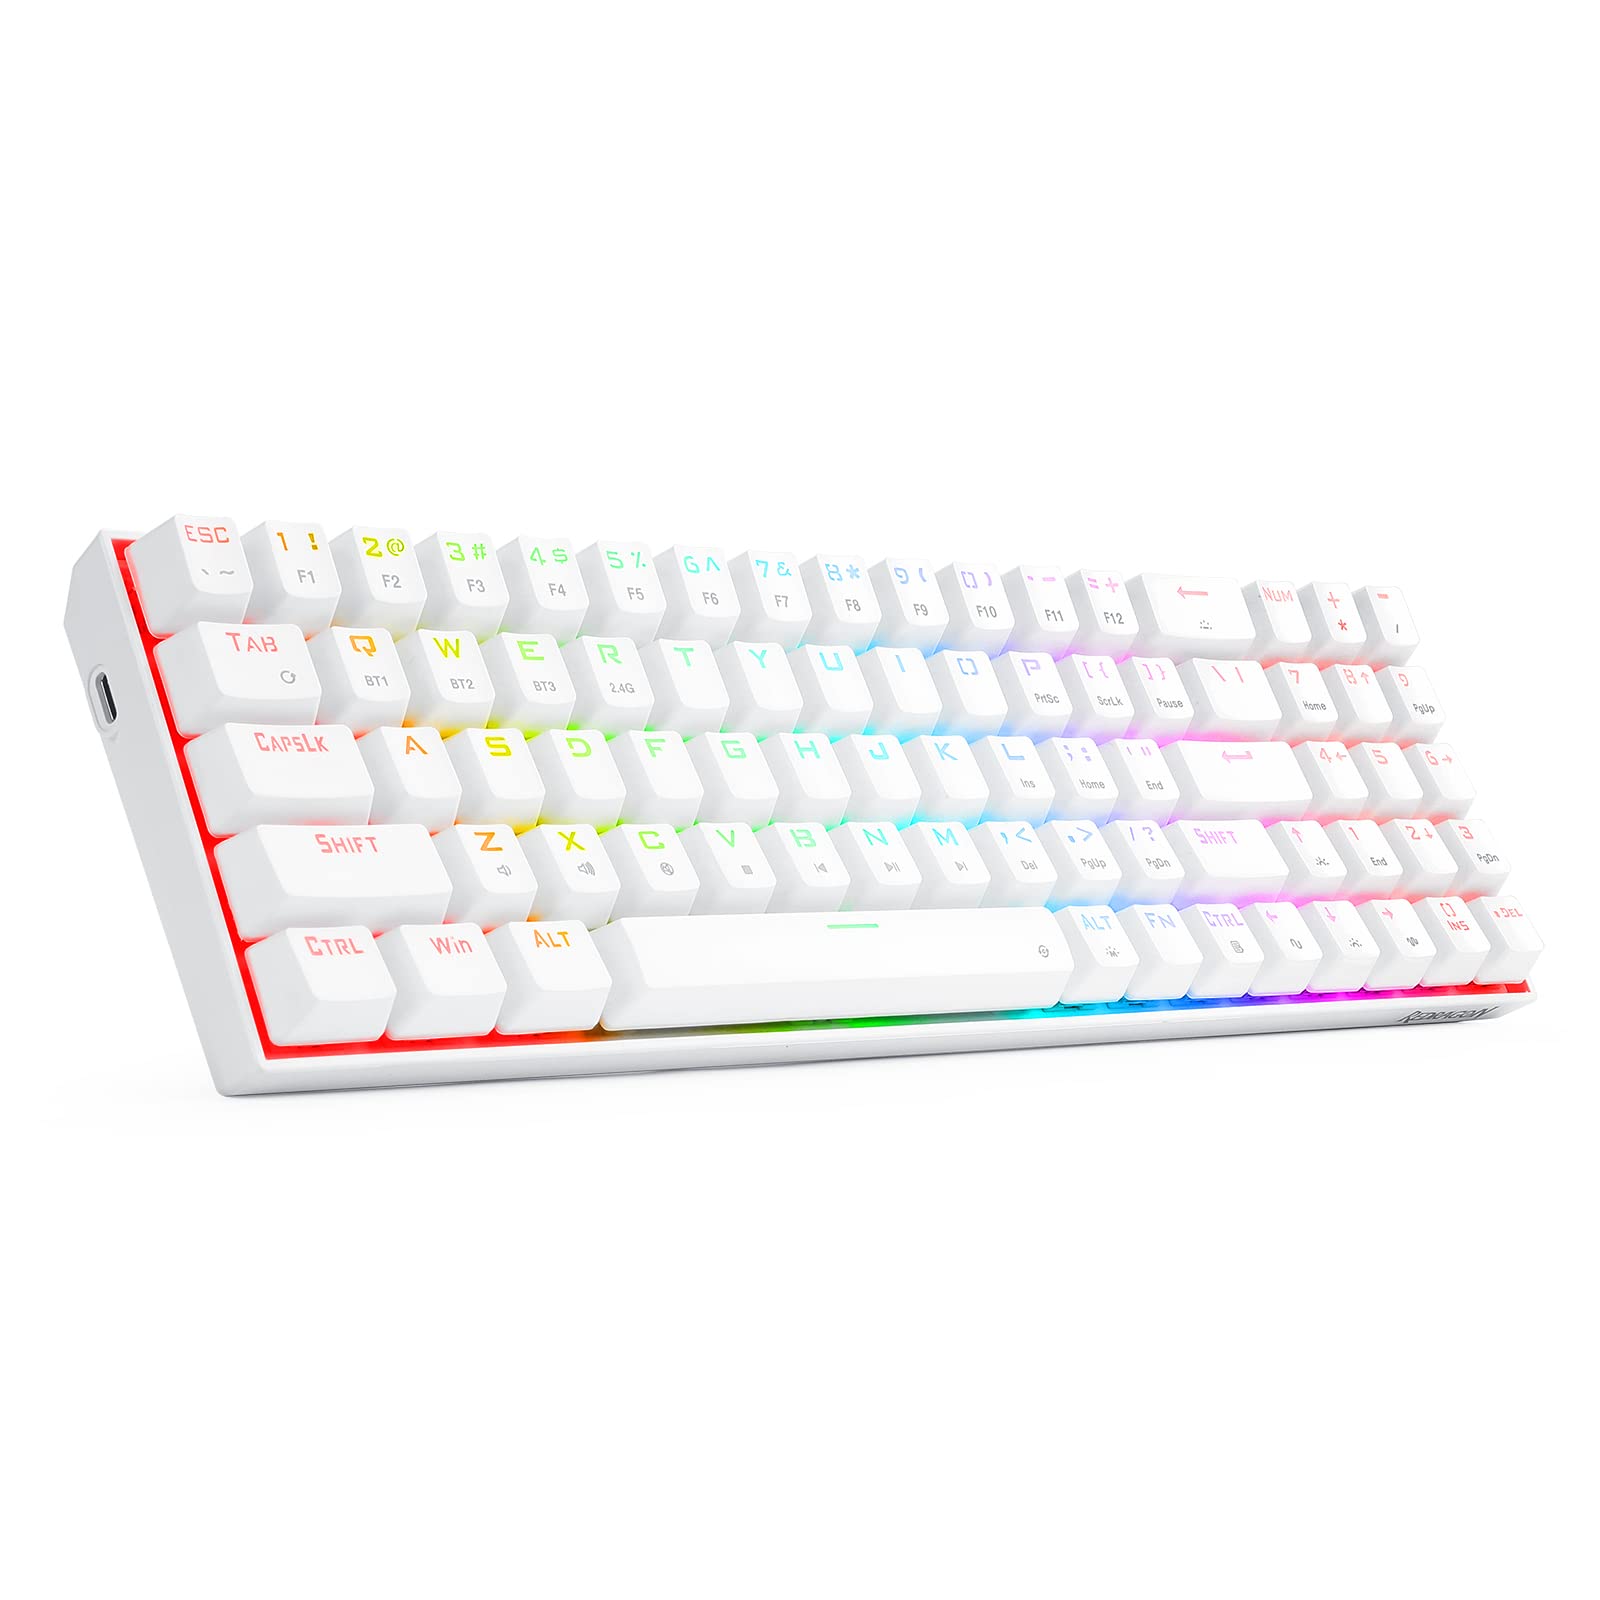 Redragon K627 Pro Mechanical Gaming Keyboard RGB LED Backlit 78 Key Wired/Wireless 2.4G and Bluetooth with Anti-Dust Brown Switches for PC Gamers (White)